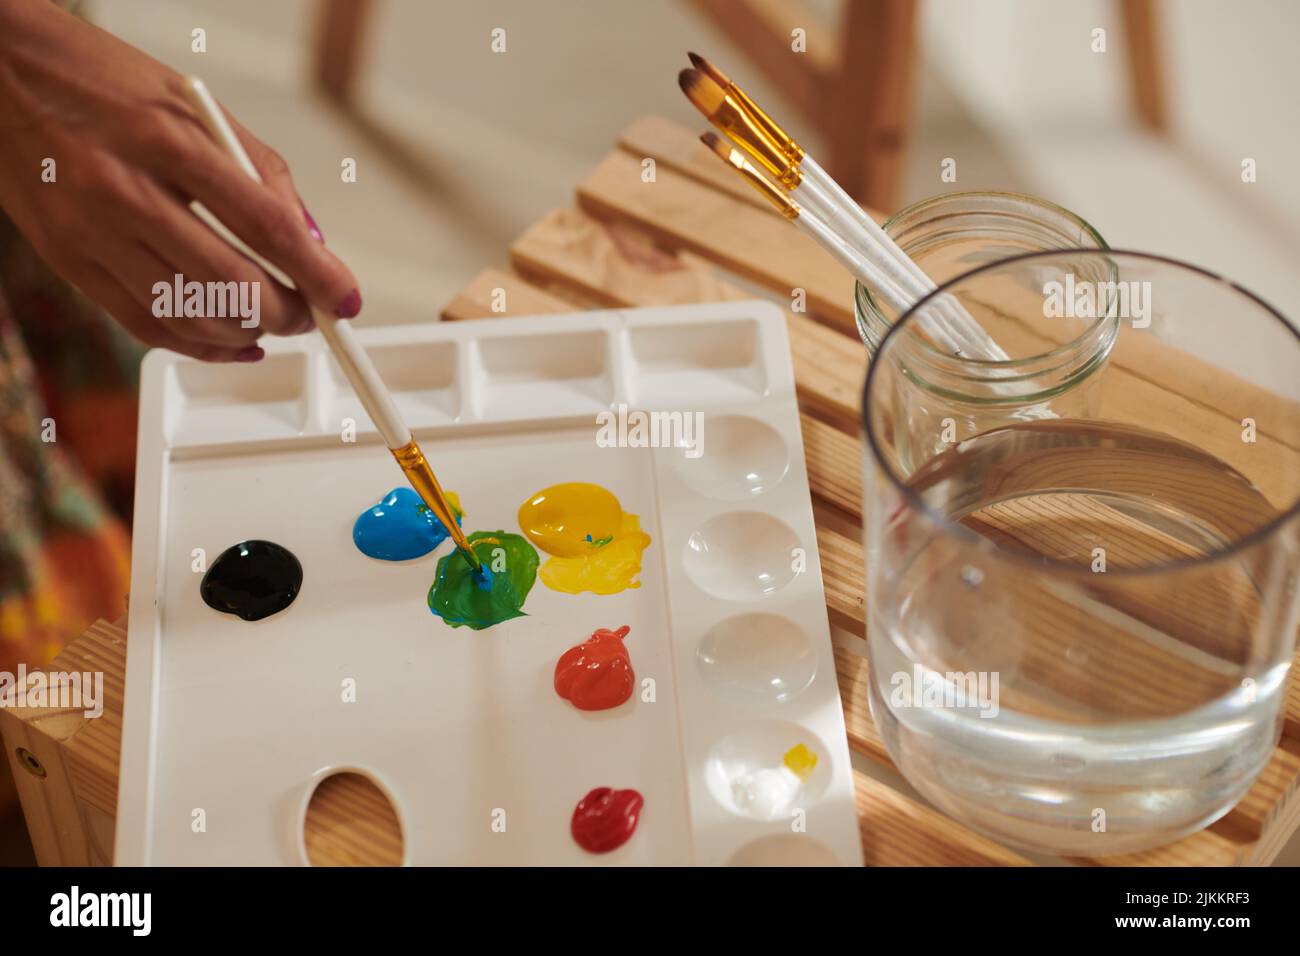 Closeup image of female artist mixing colors on plastic palette Stock Photo